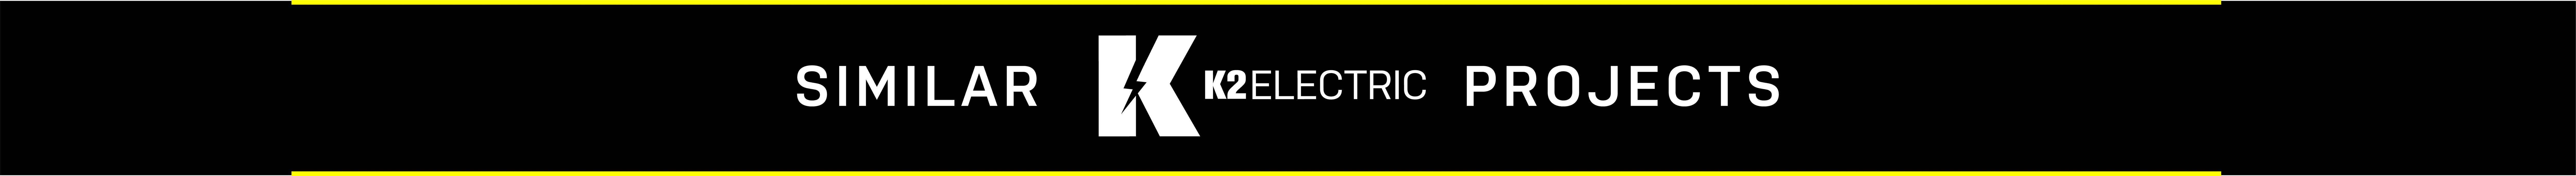 A black banner with yellow borders displays the text "SIMILAR KELECTRIC PROJECTS" in bold white letters, styled like a project template.